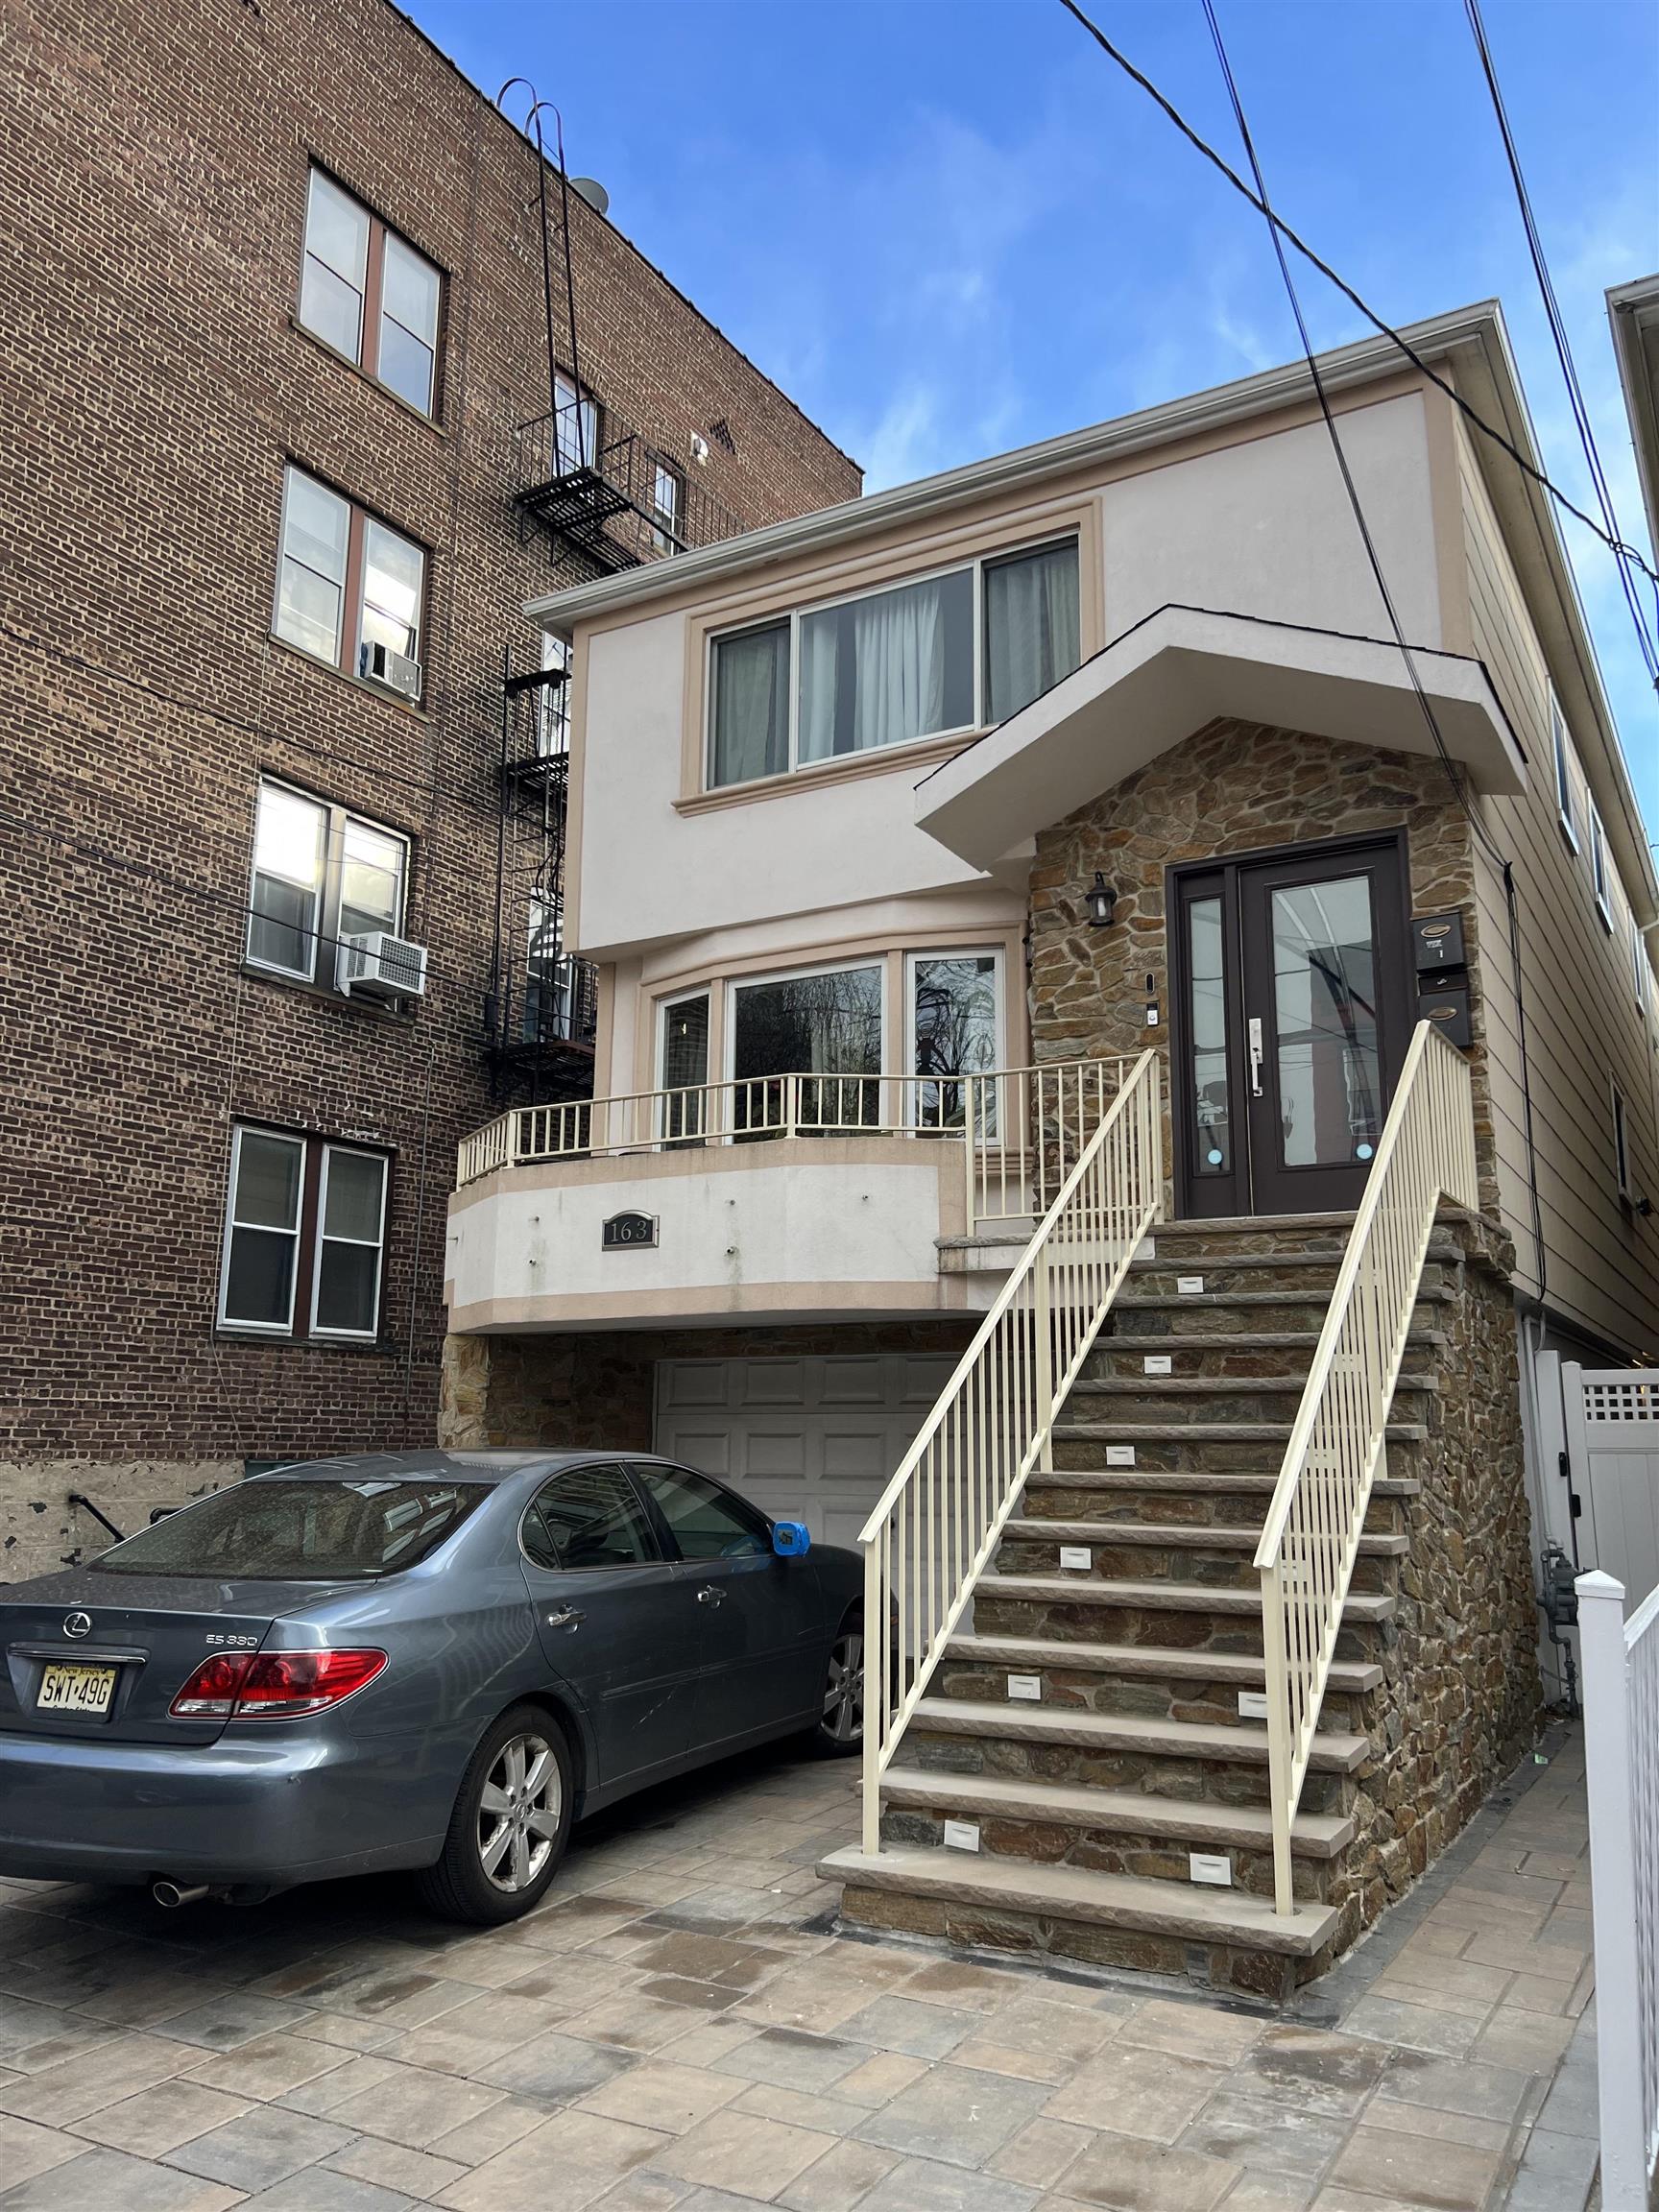 # 240007337 - For Rent in JERSEY CITY - Heights NJ